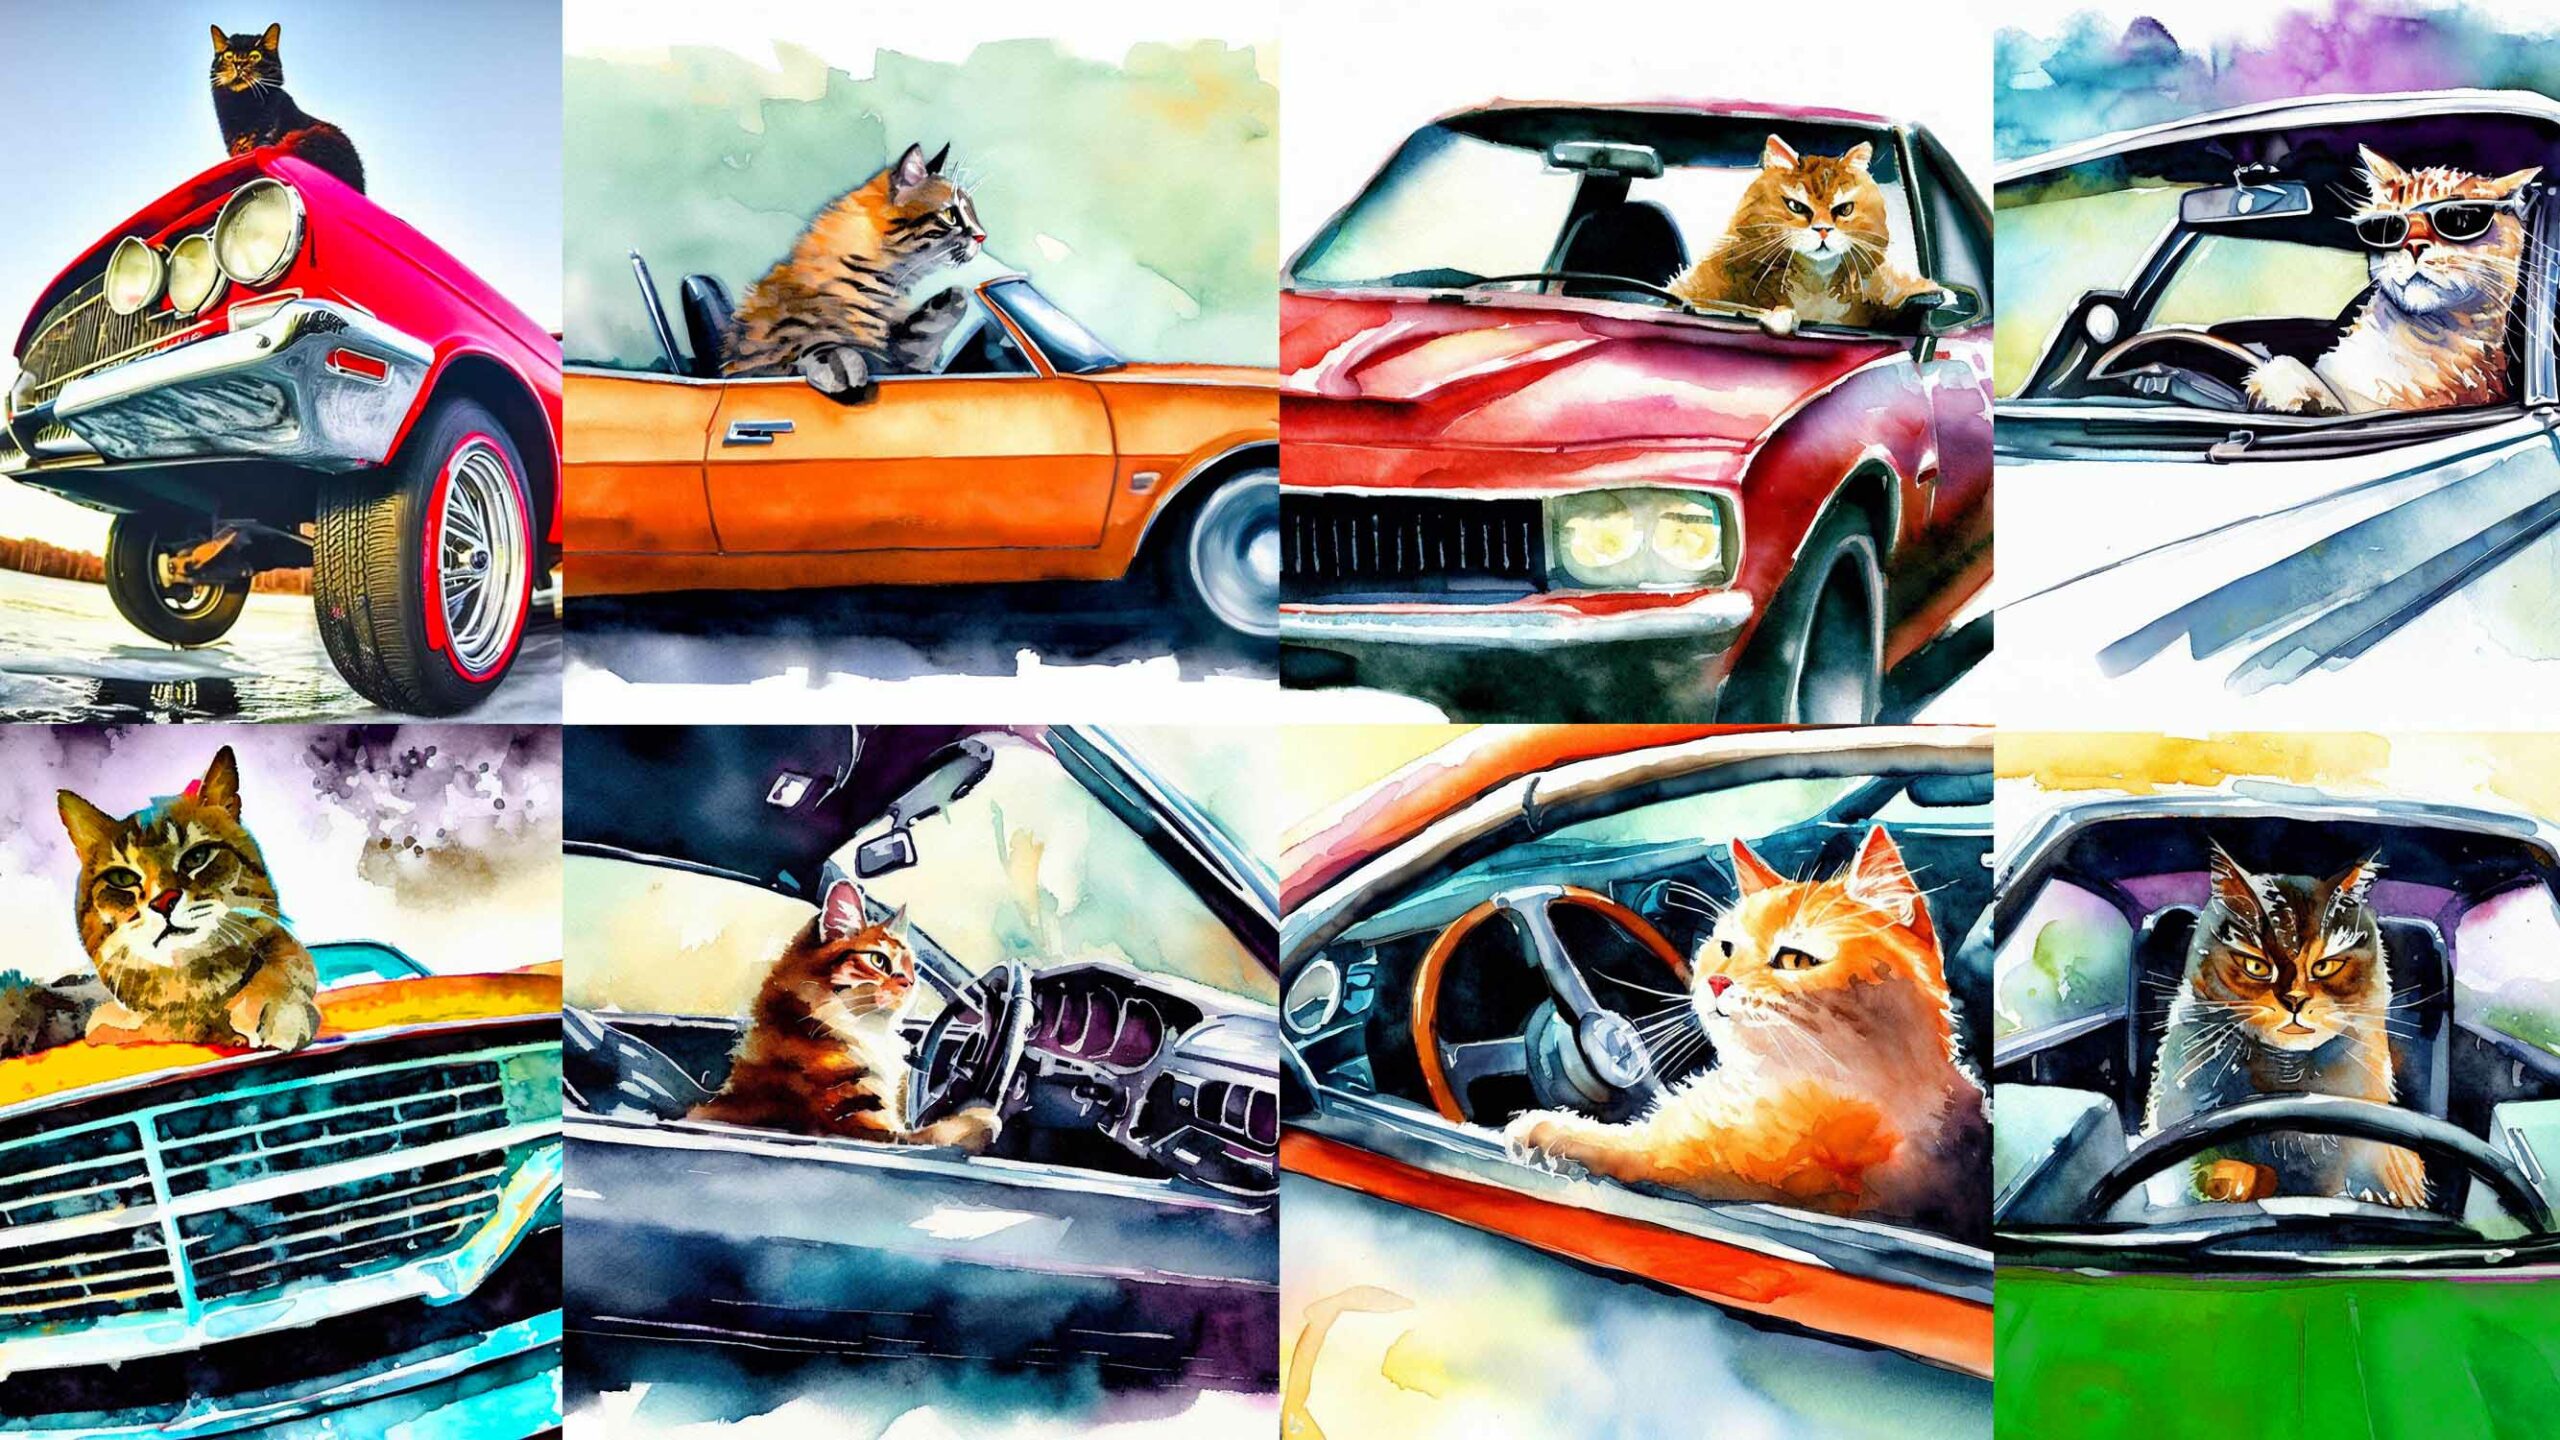 Watercolor Paintings Of Cats Driving Muscle Cars